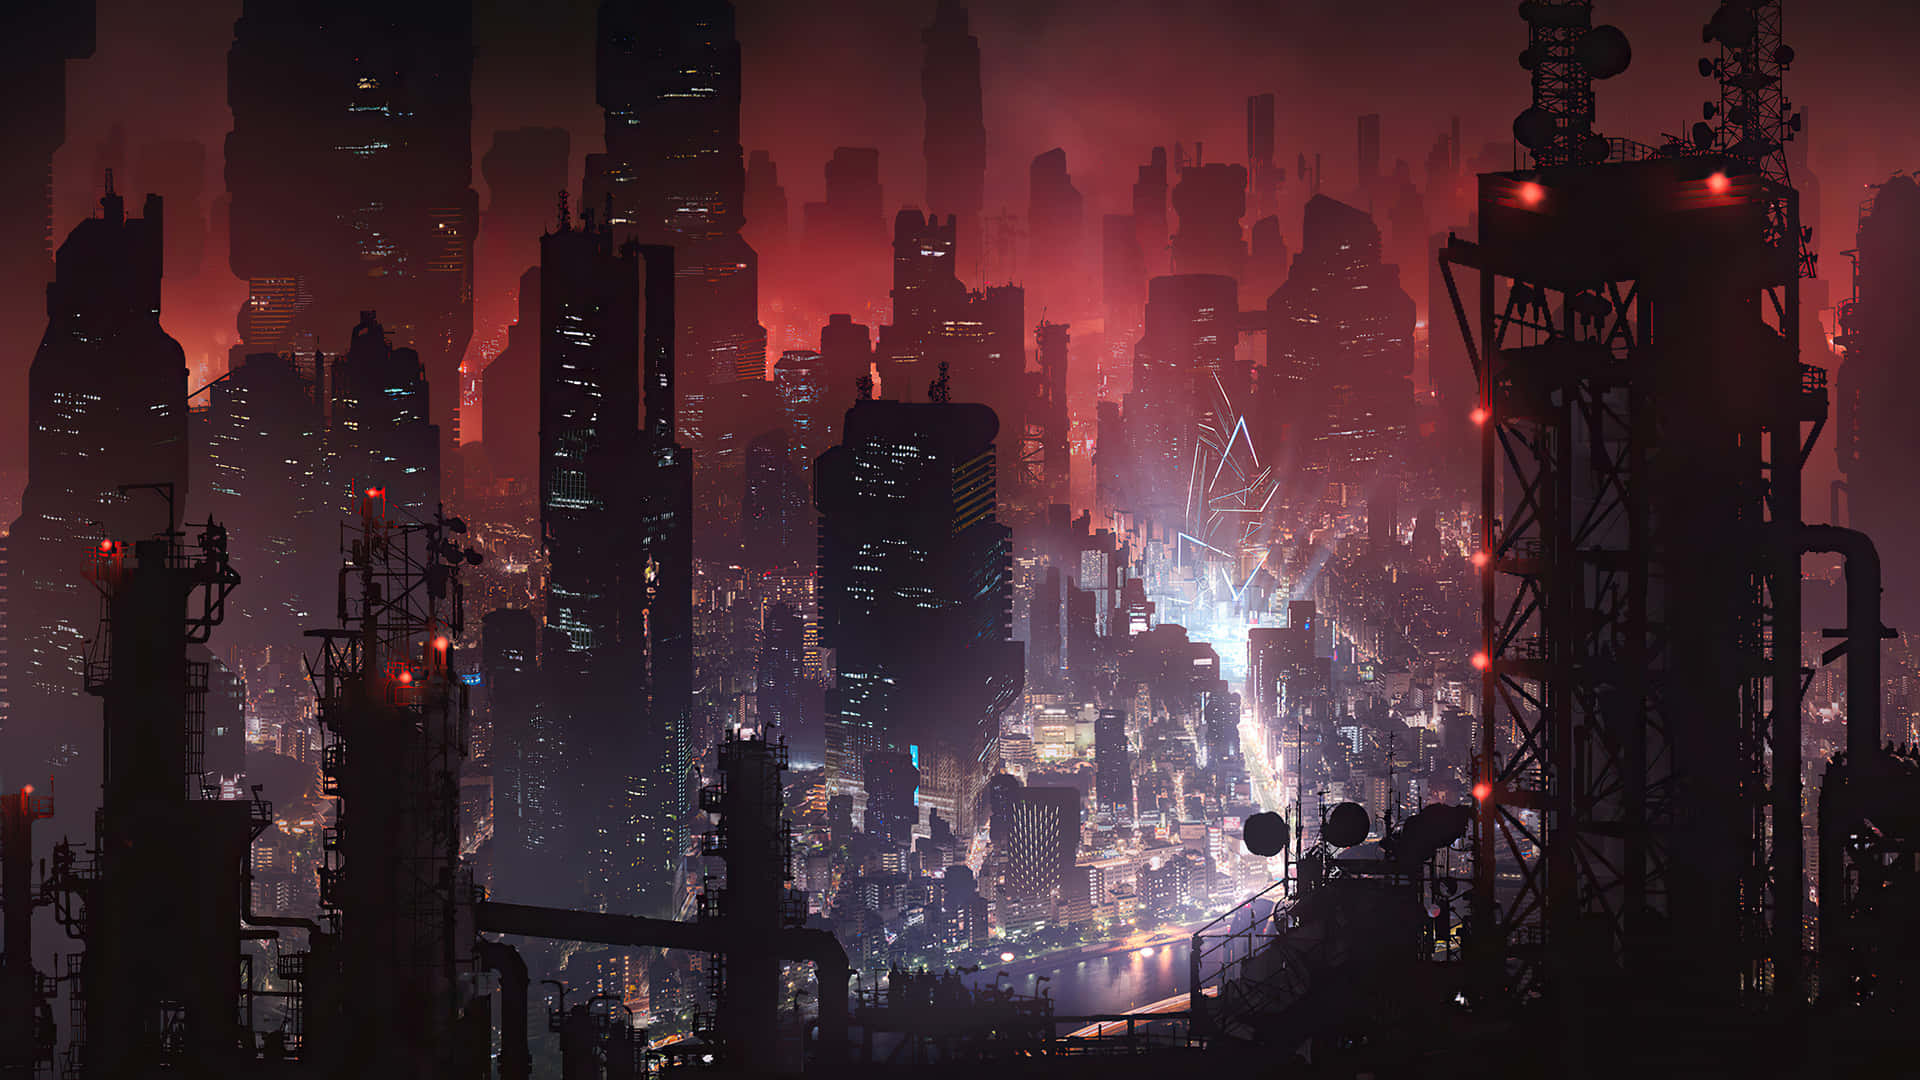 Explore the dizzying heights and depths of Cyberpunk City